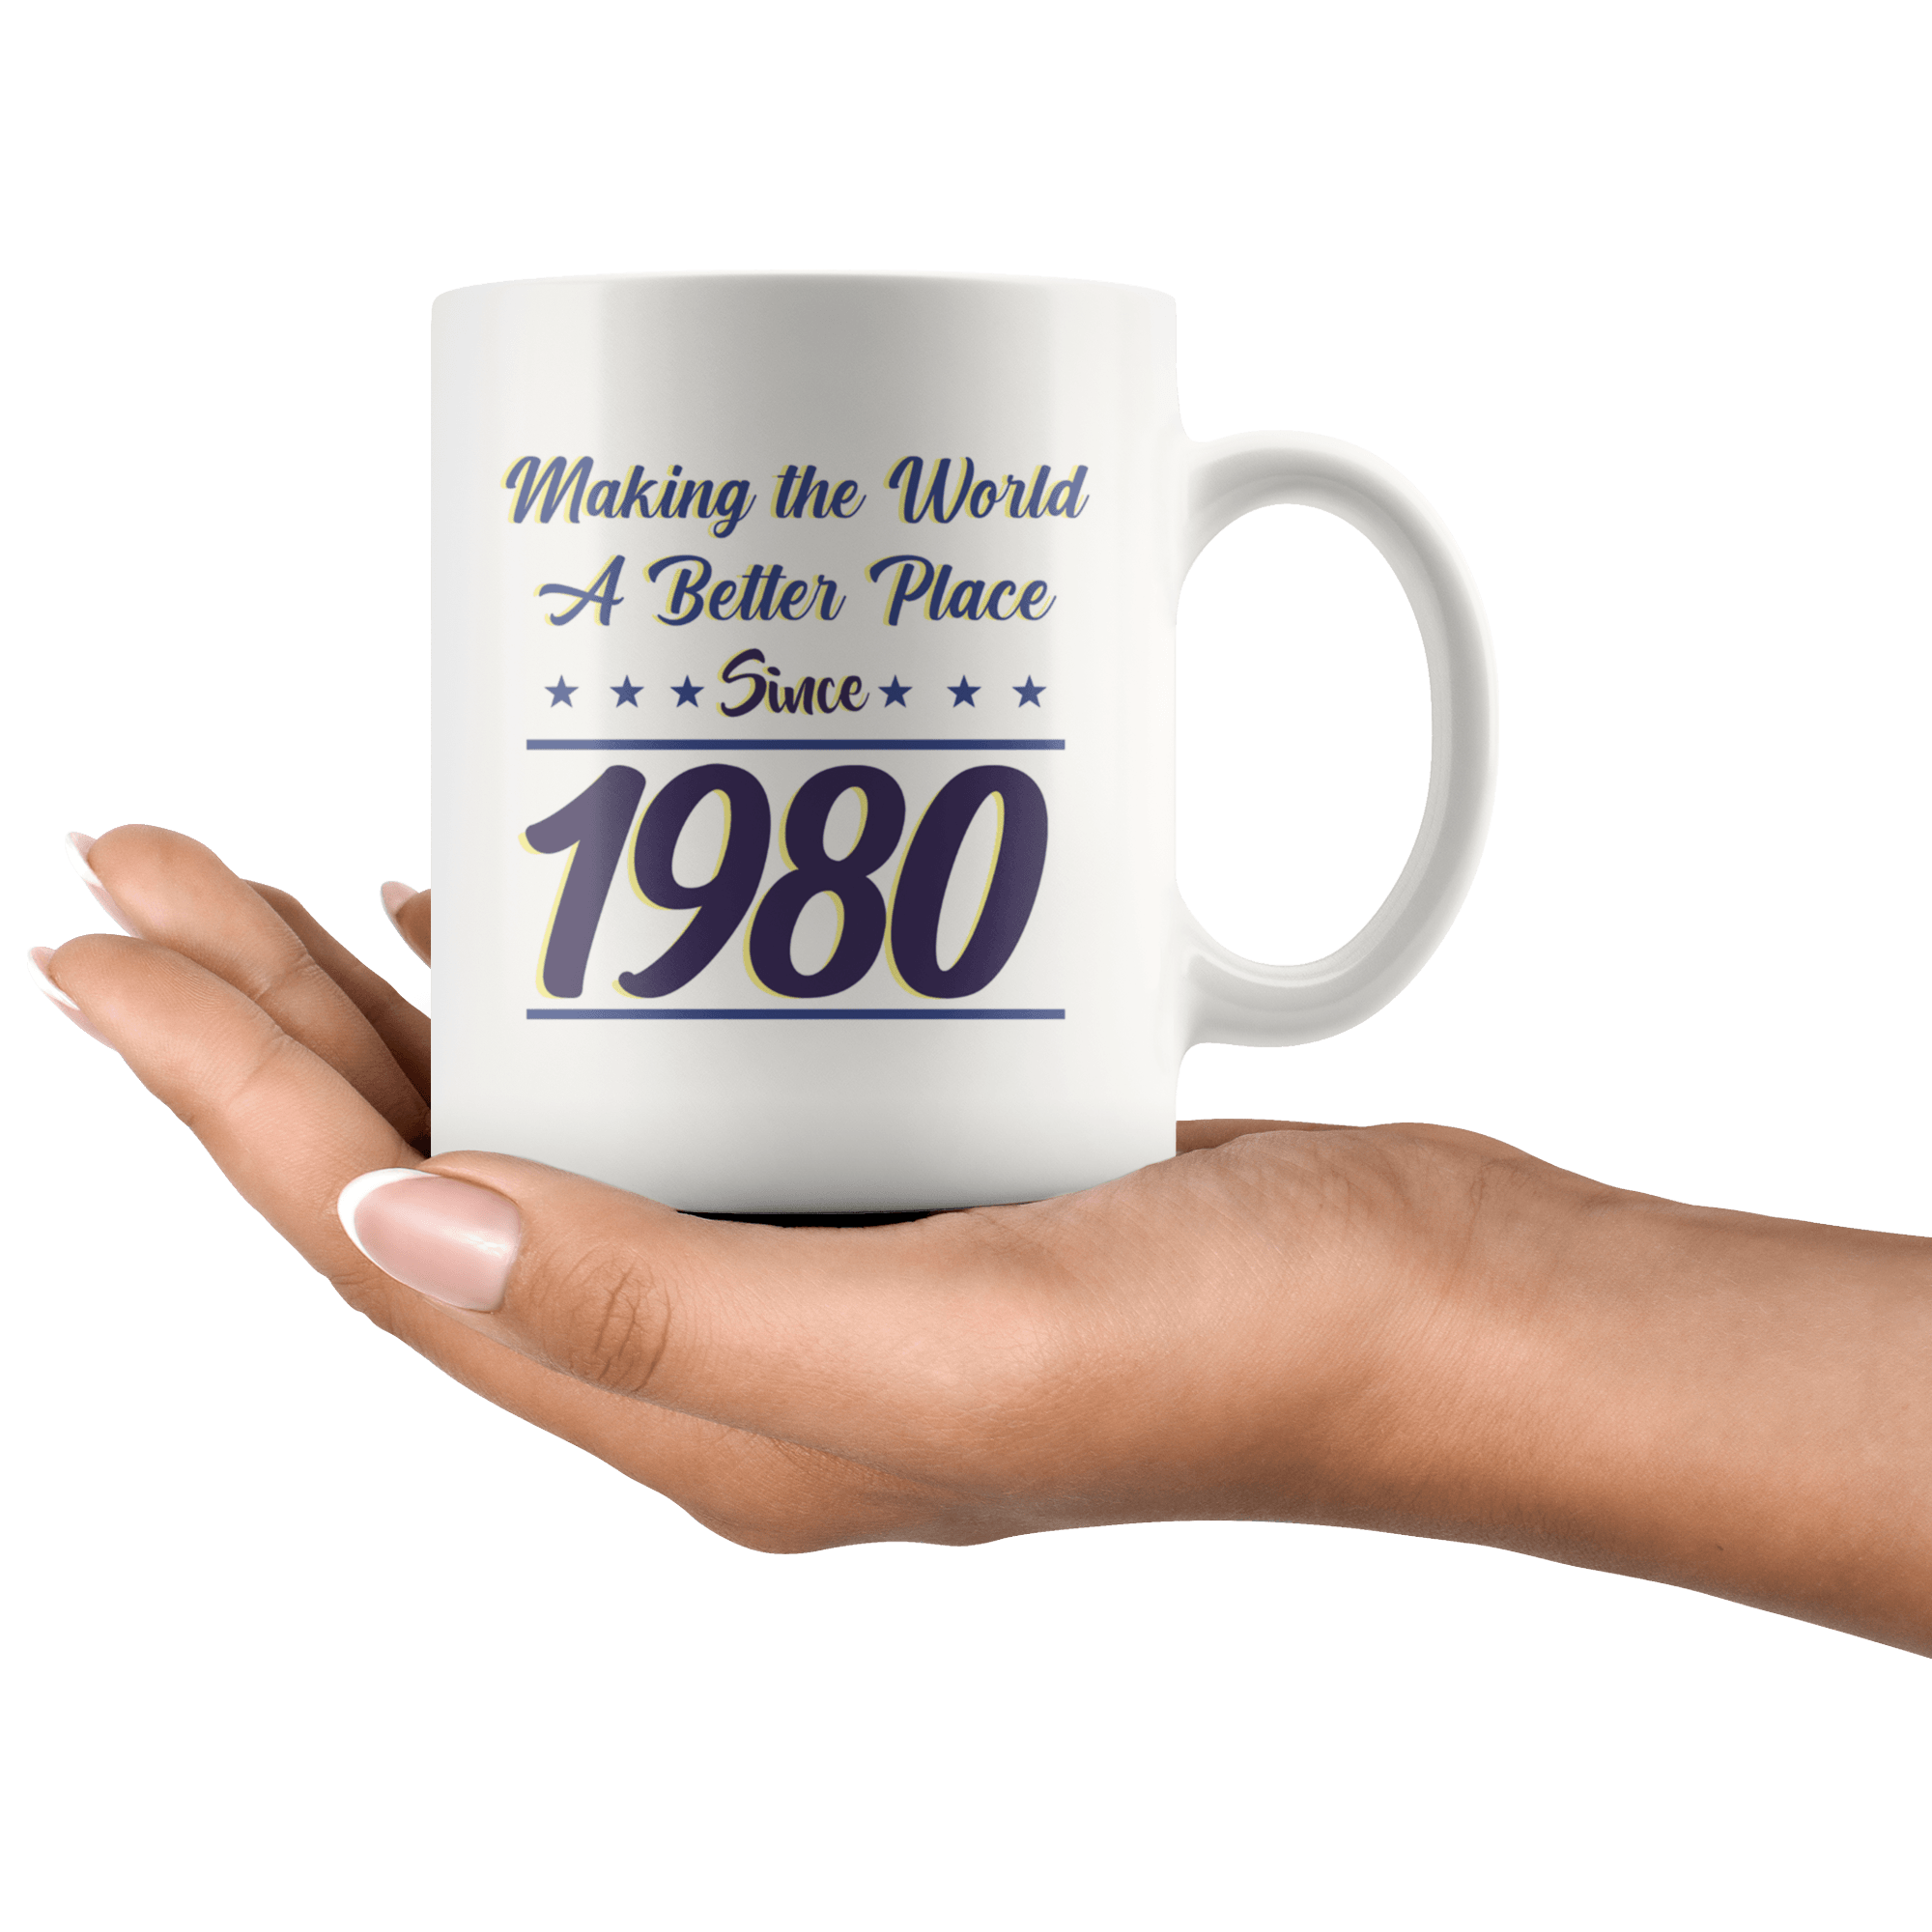 Making The World a Better Place Since 1980 - 40th Birthday Coffee Mug - Great Gift For Men and Women - Fortieth Birthday Present - SPCM